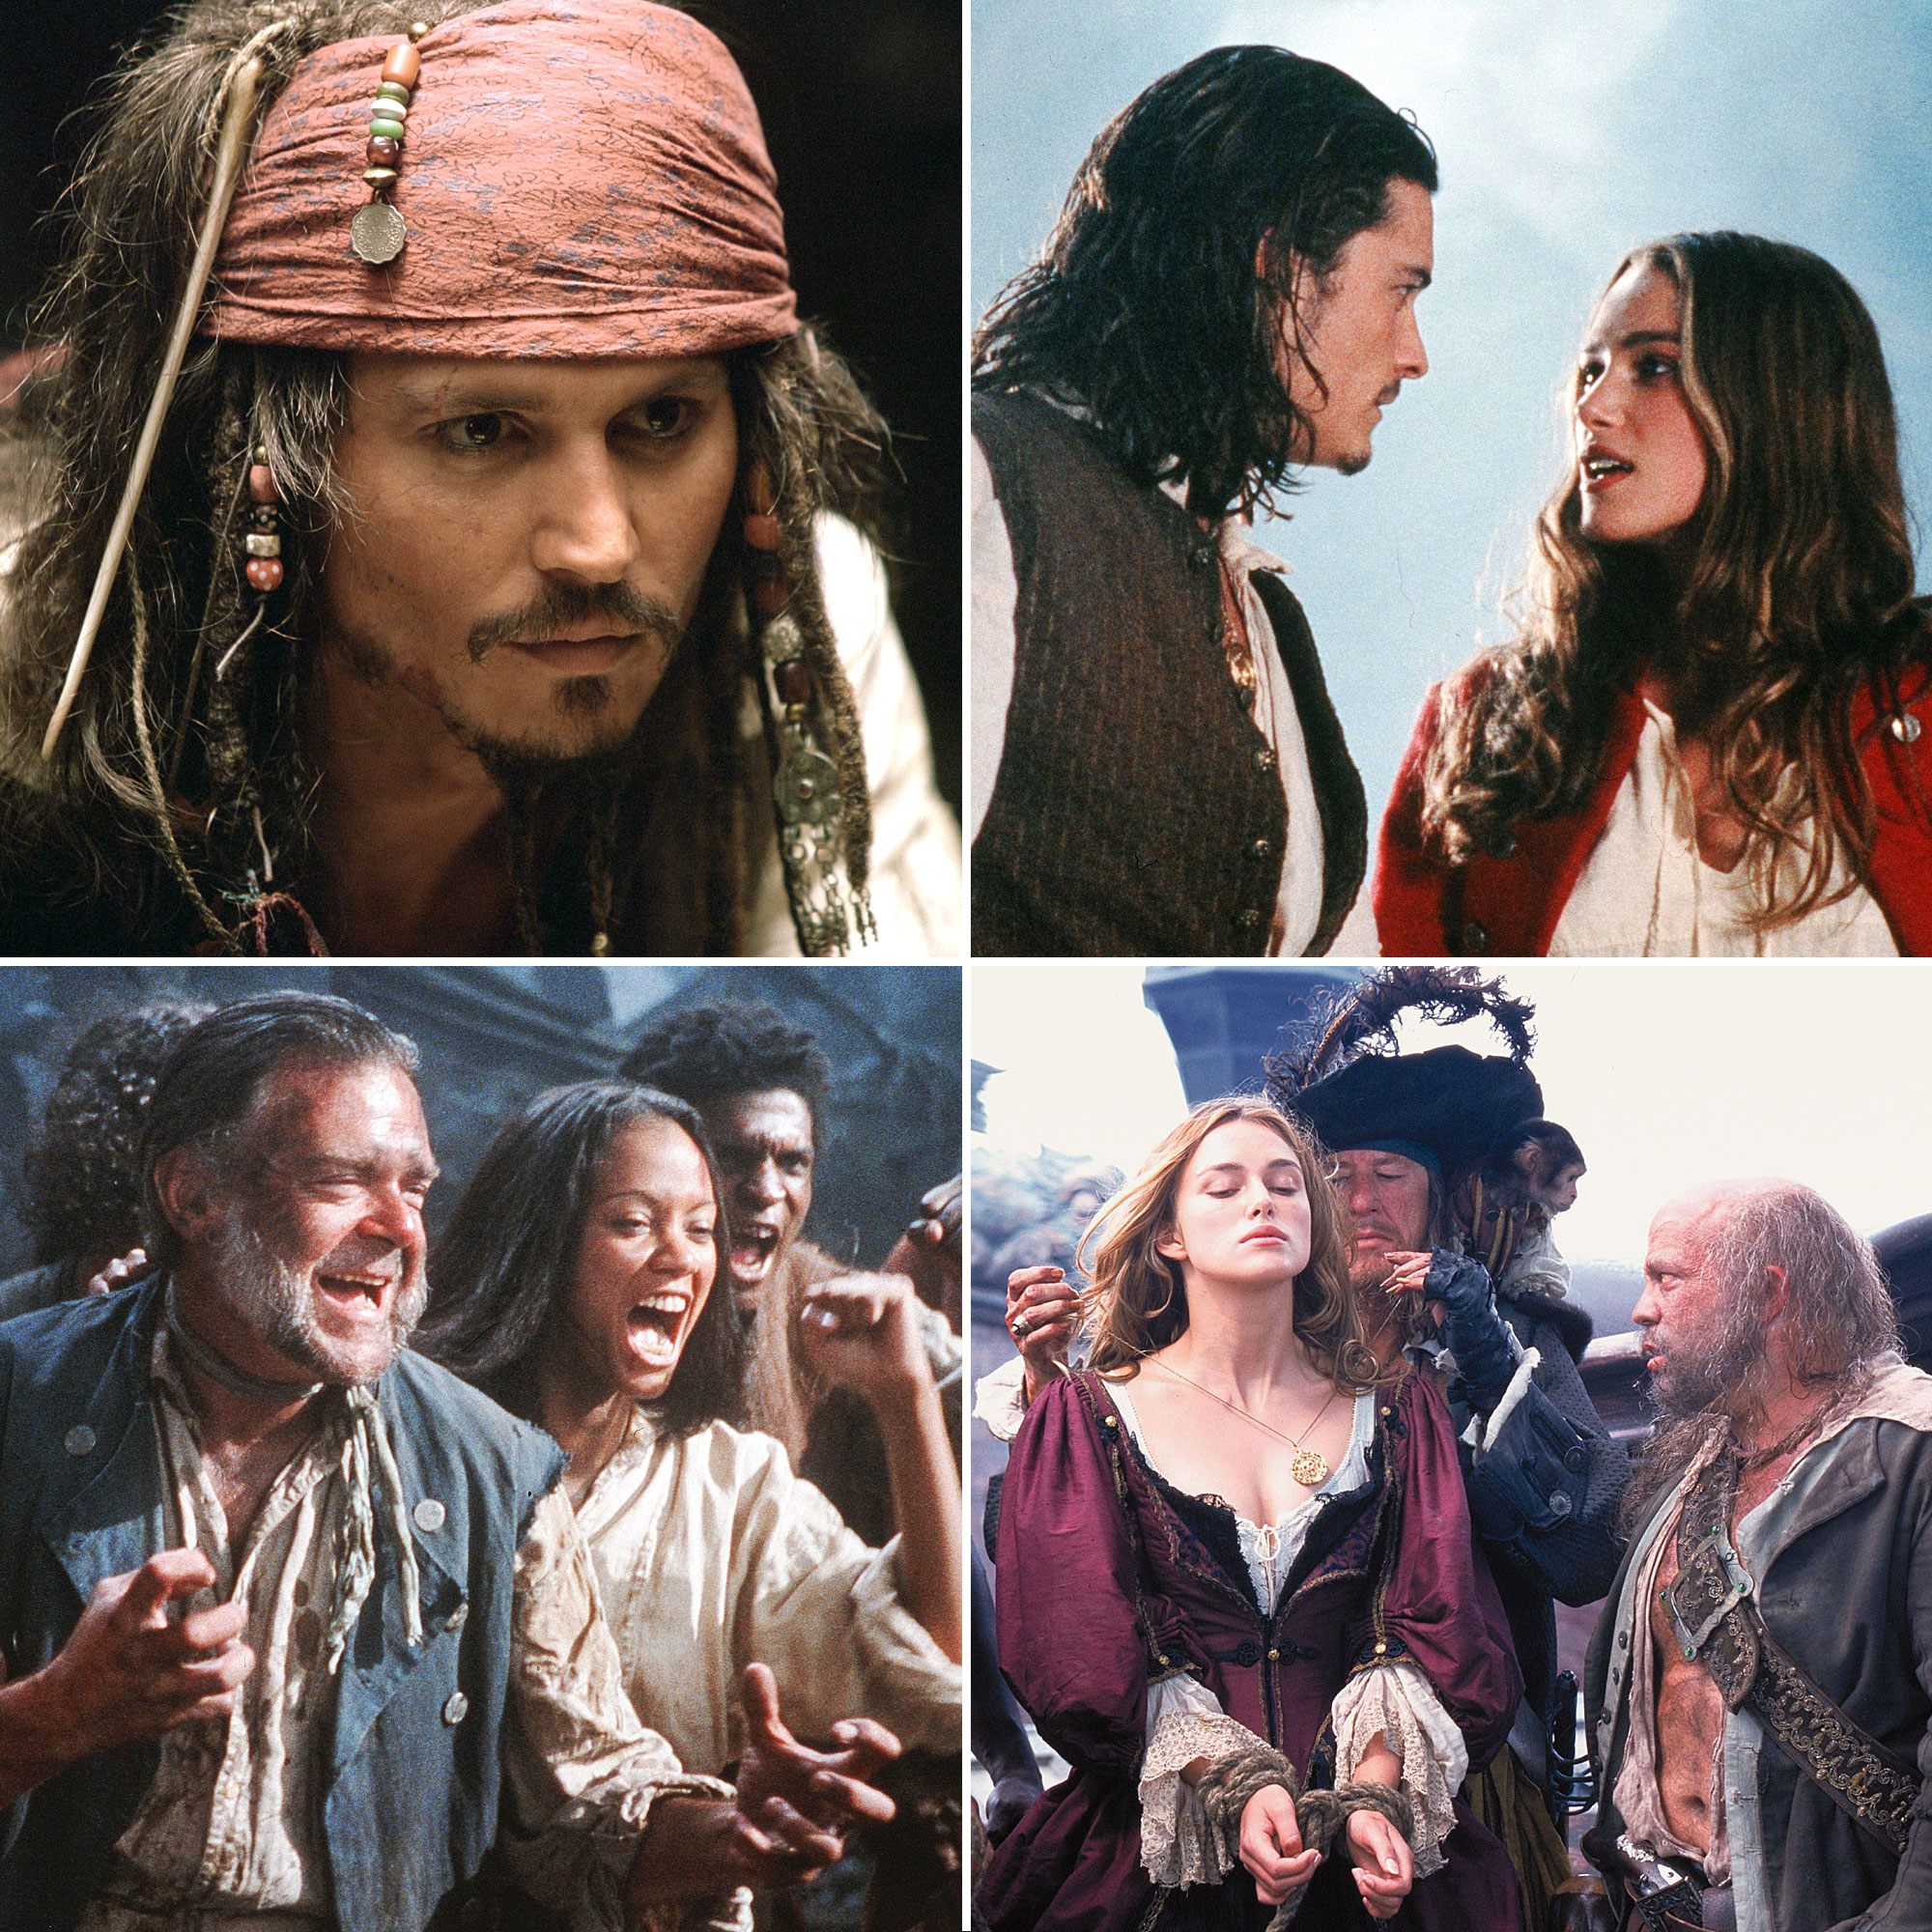 'Pirates of the Caribbean' Cast Where Are They Now?